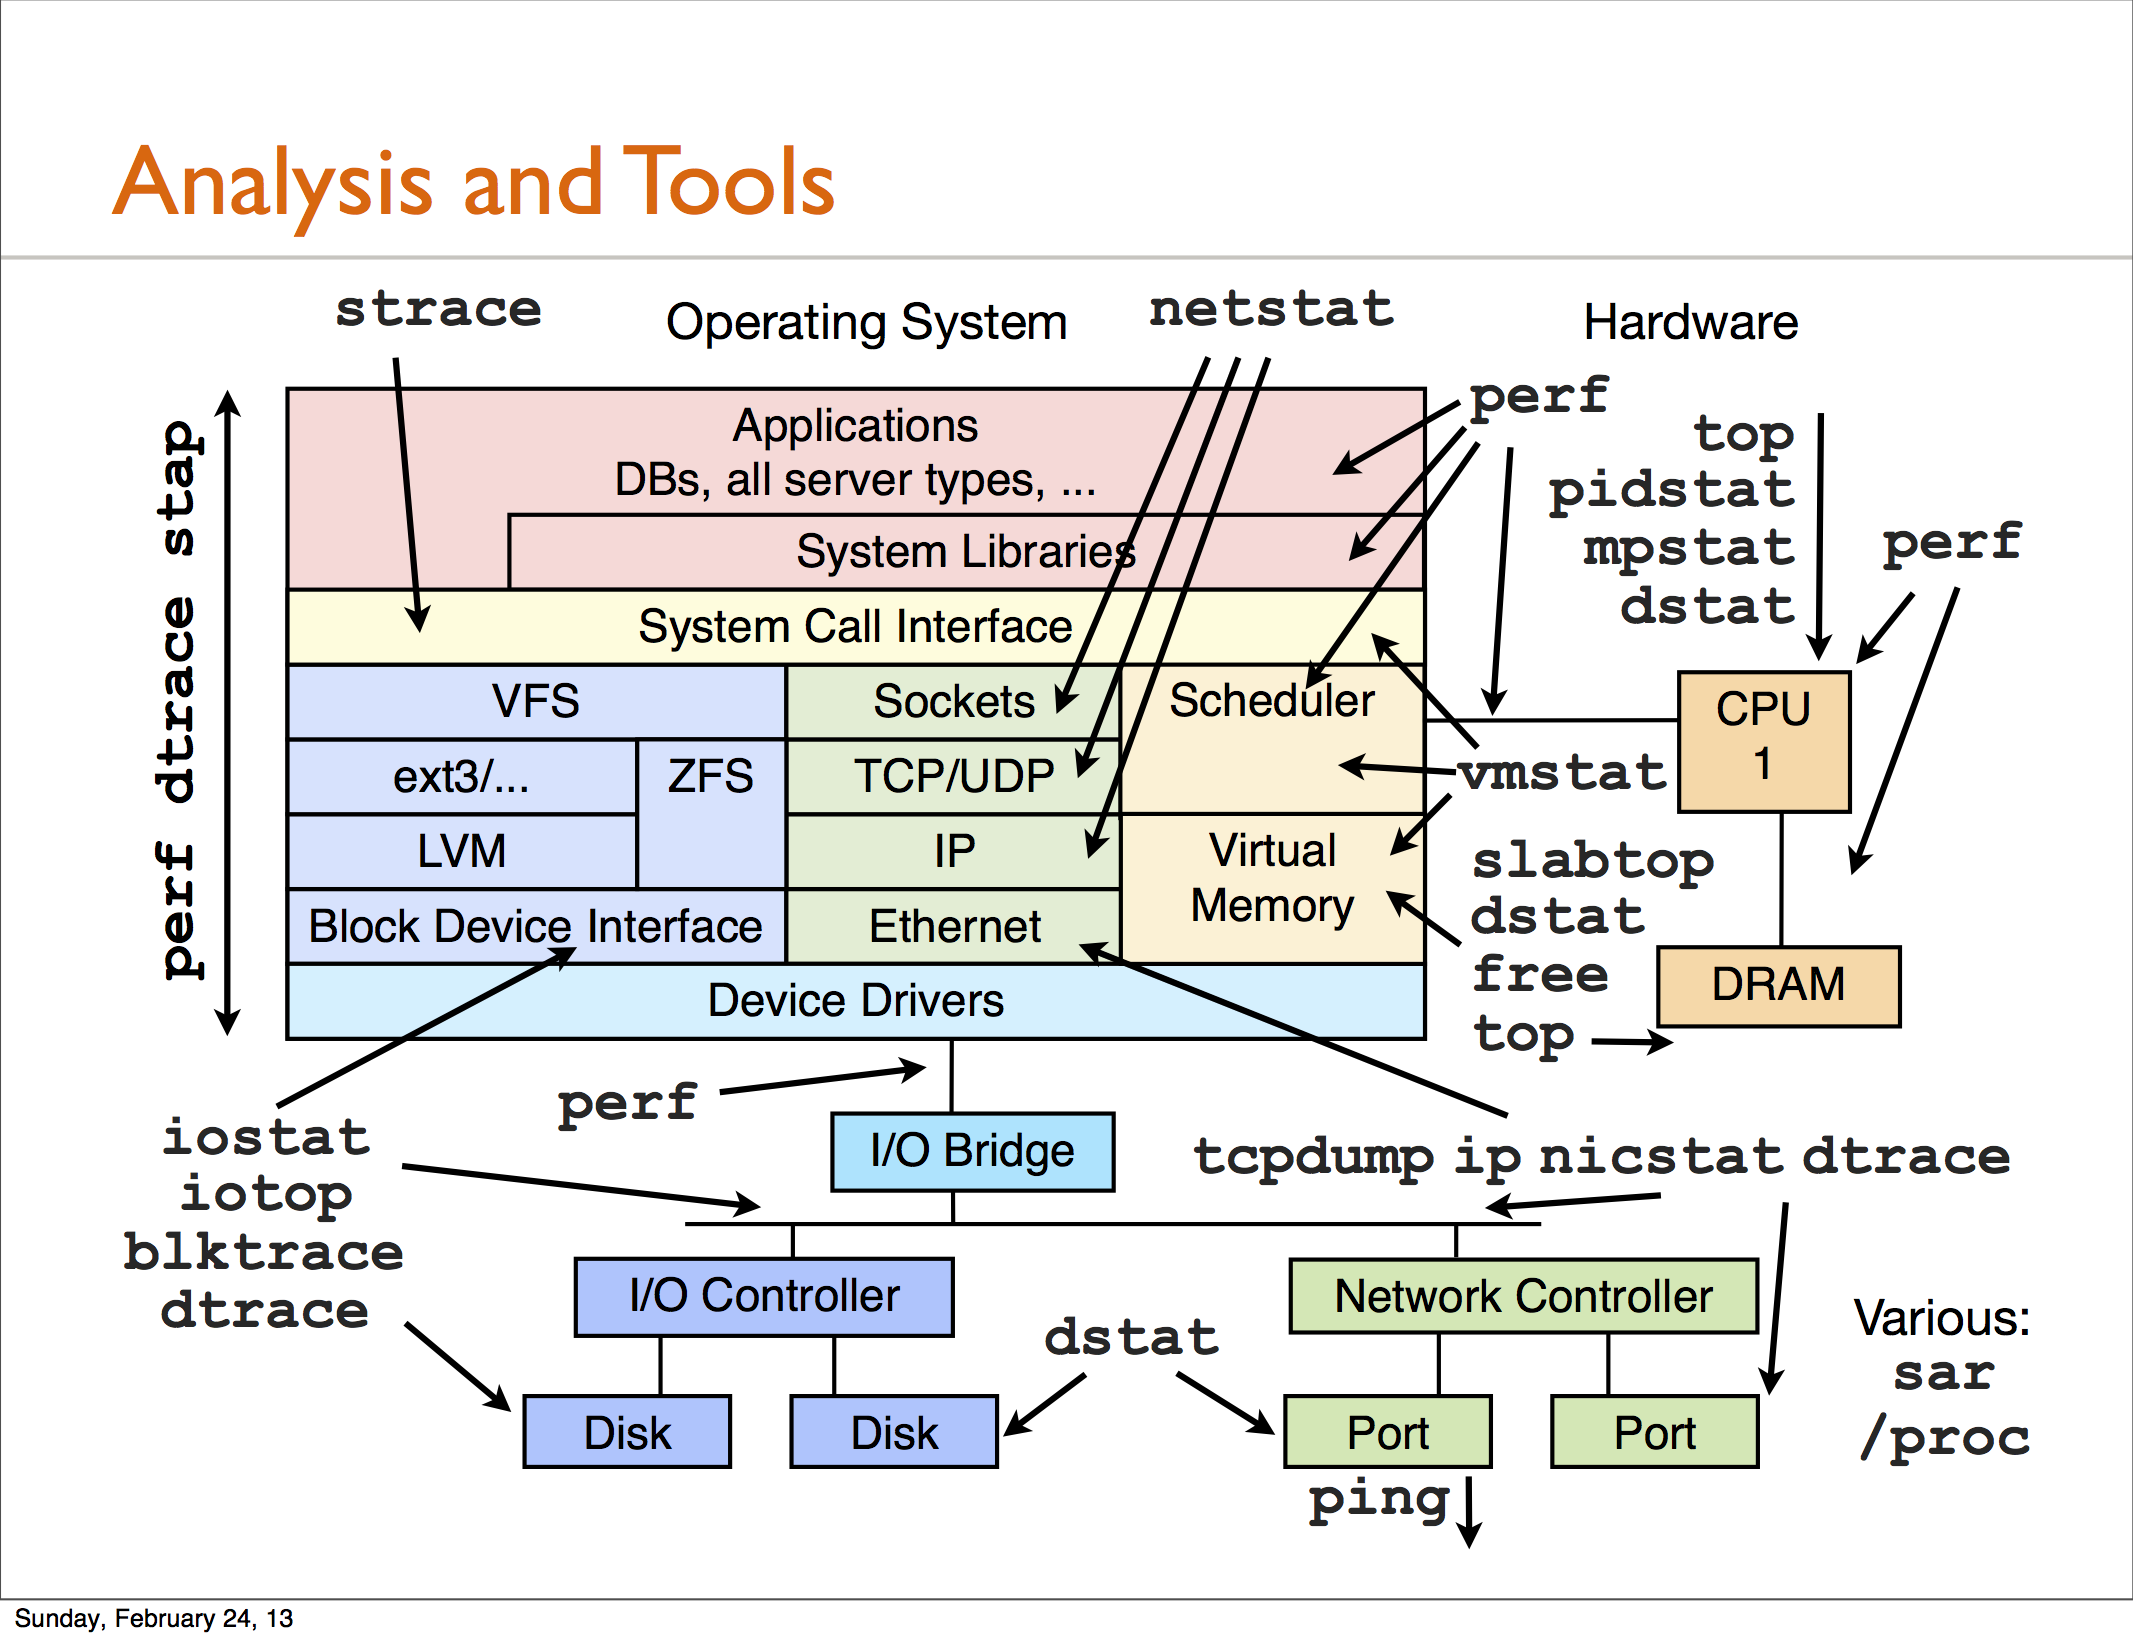 Helpful Linux I/O stack diagram & Analysis and Tools_操作系统_02